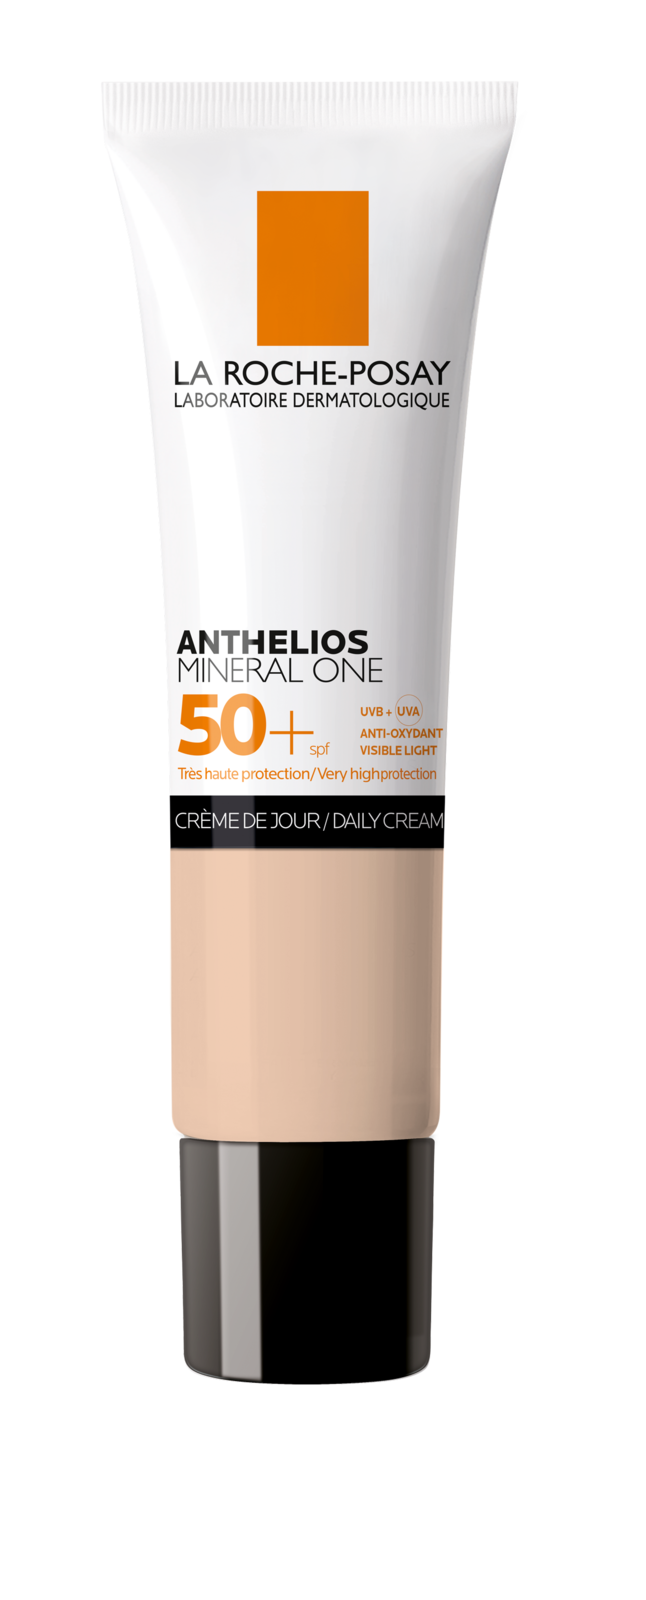 Image of La Roche-Posay Anthelios Mineral One SPF50 - Kleur 01 